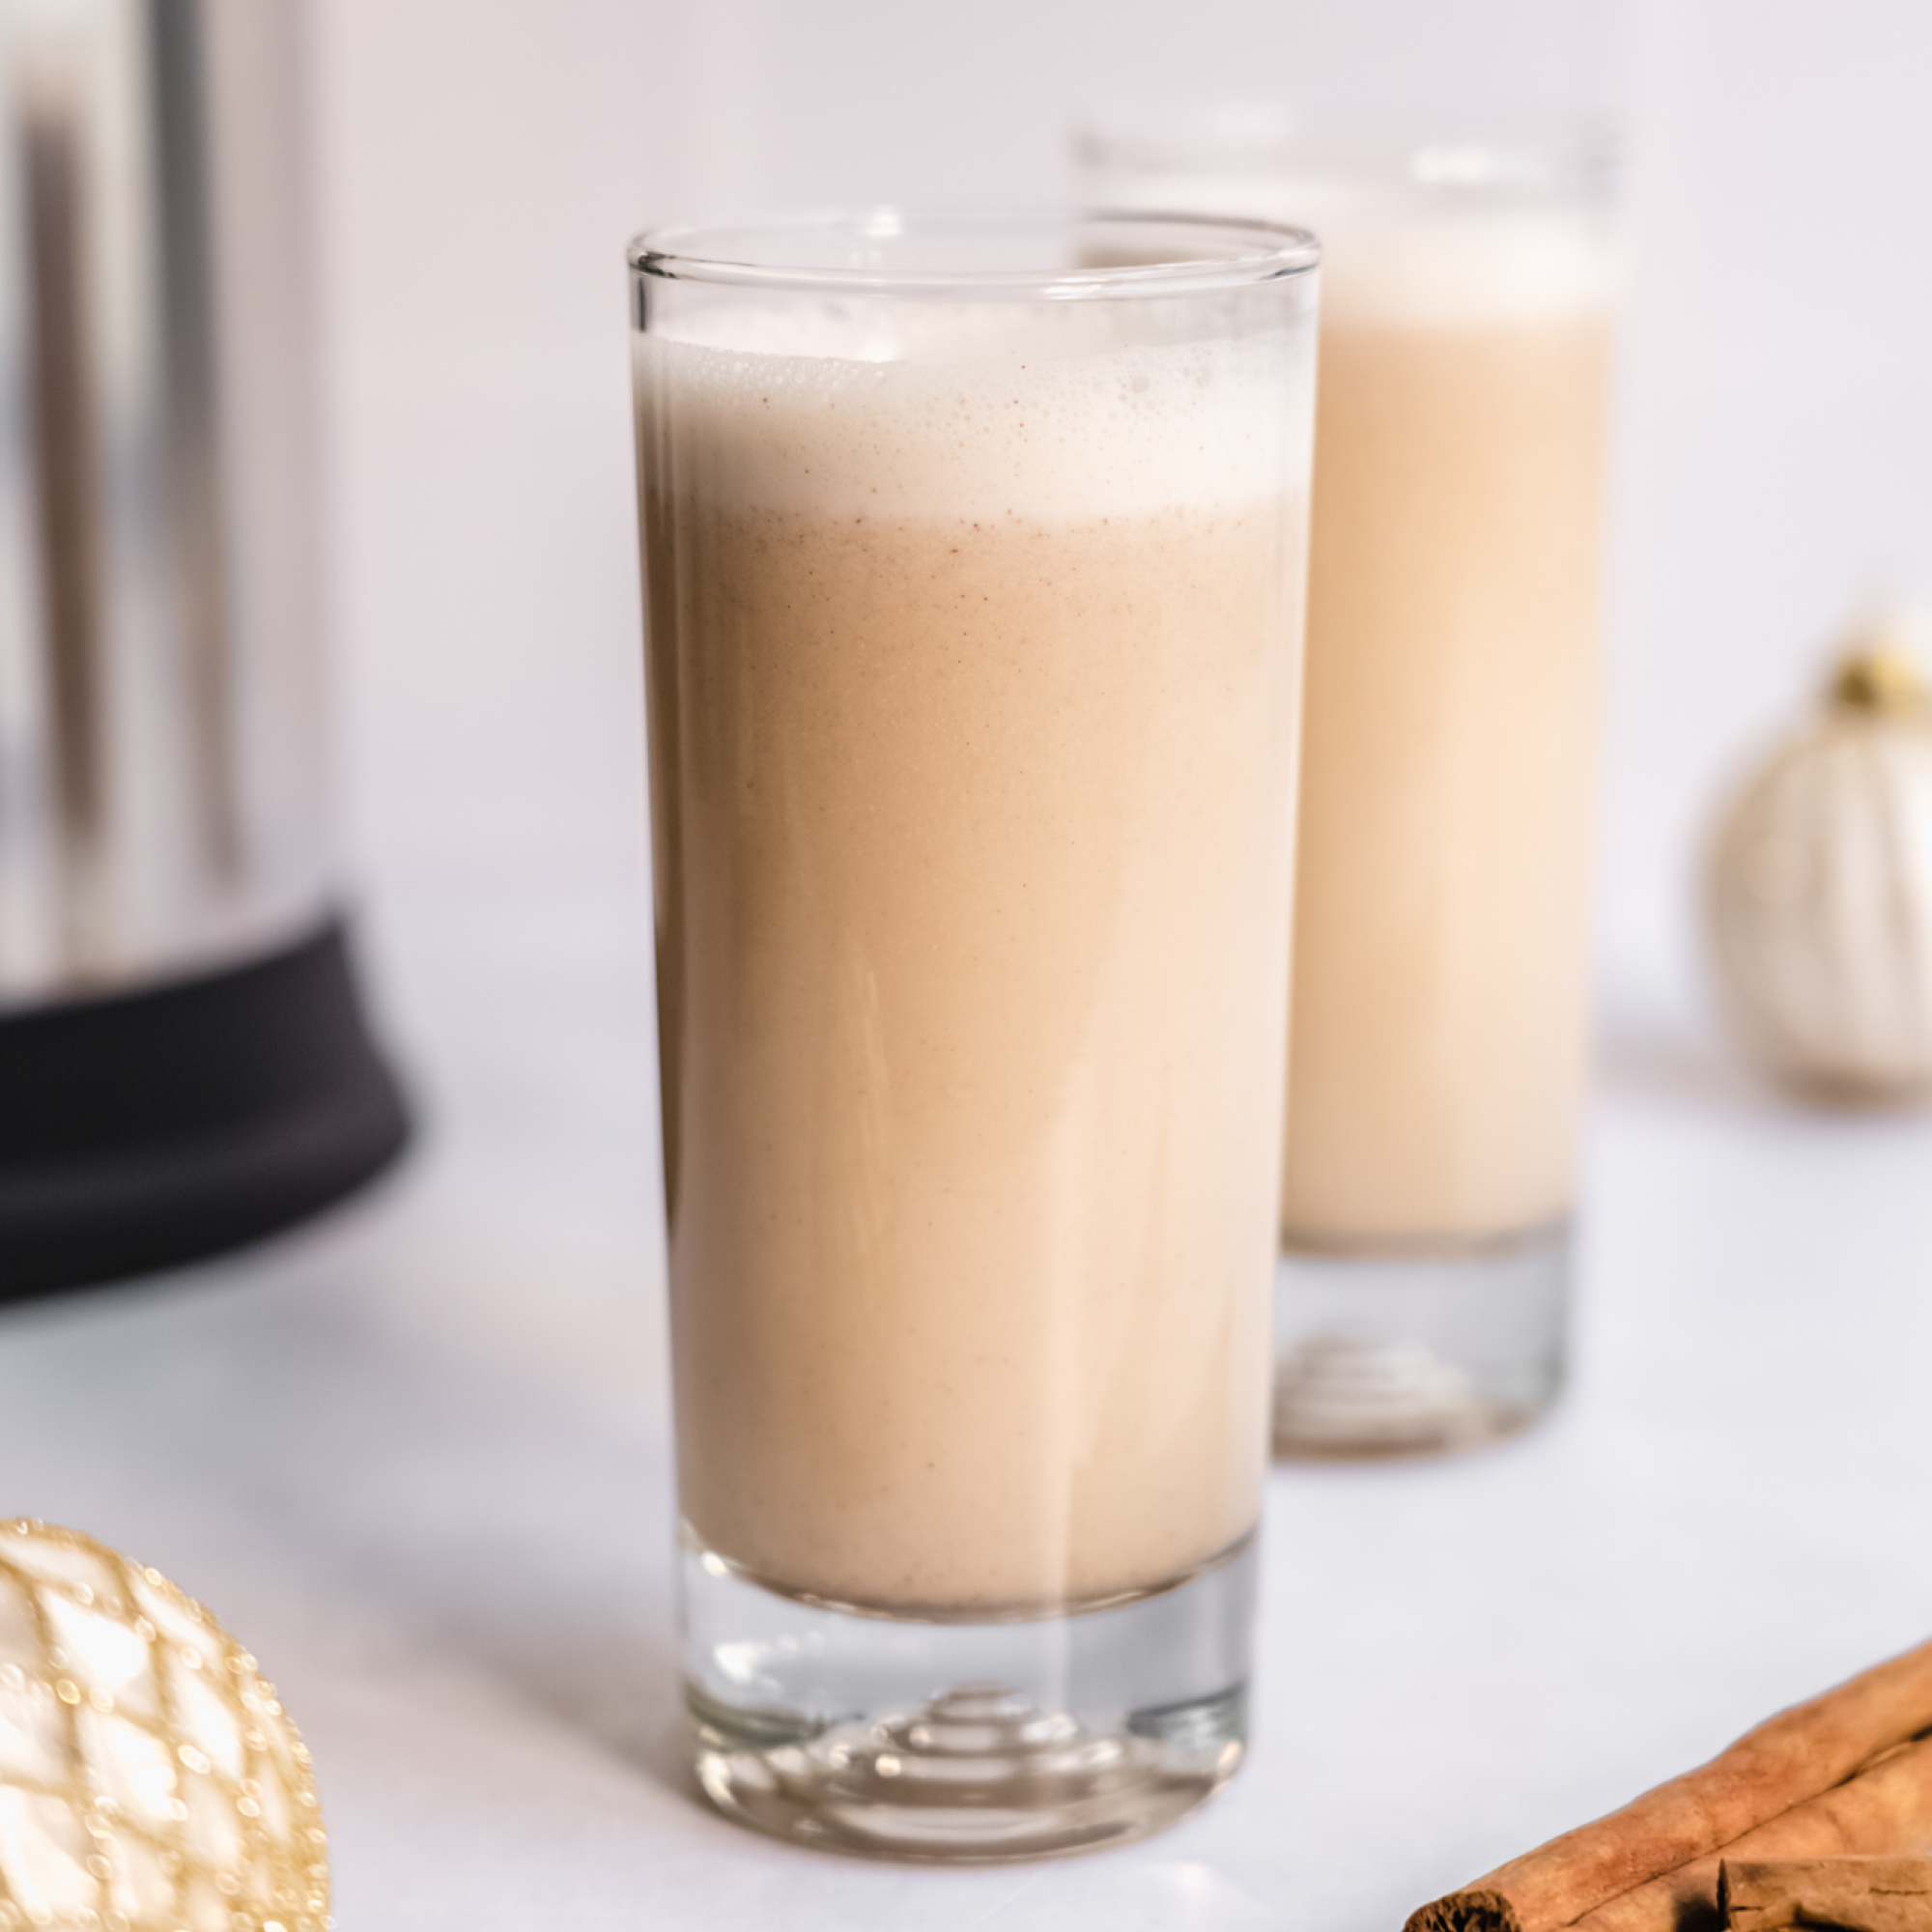 Crunchy almonds and cashews blend with cinnamon and vanilla in our delicious Snickerdoodle Milk recipe